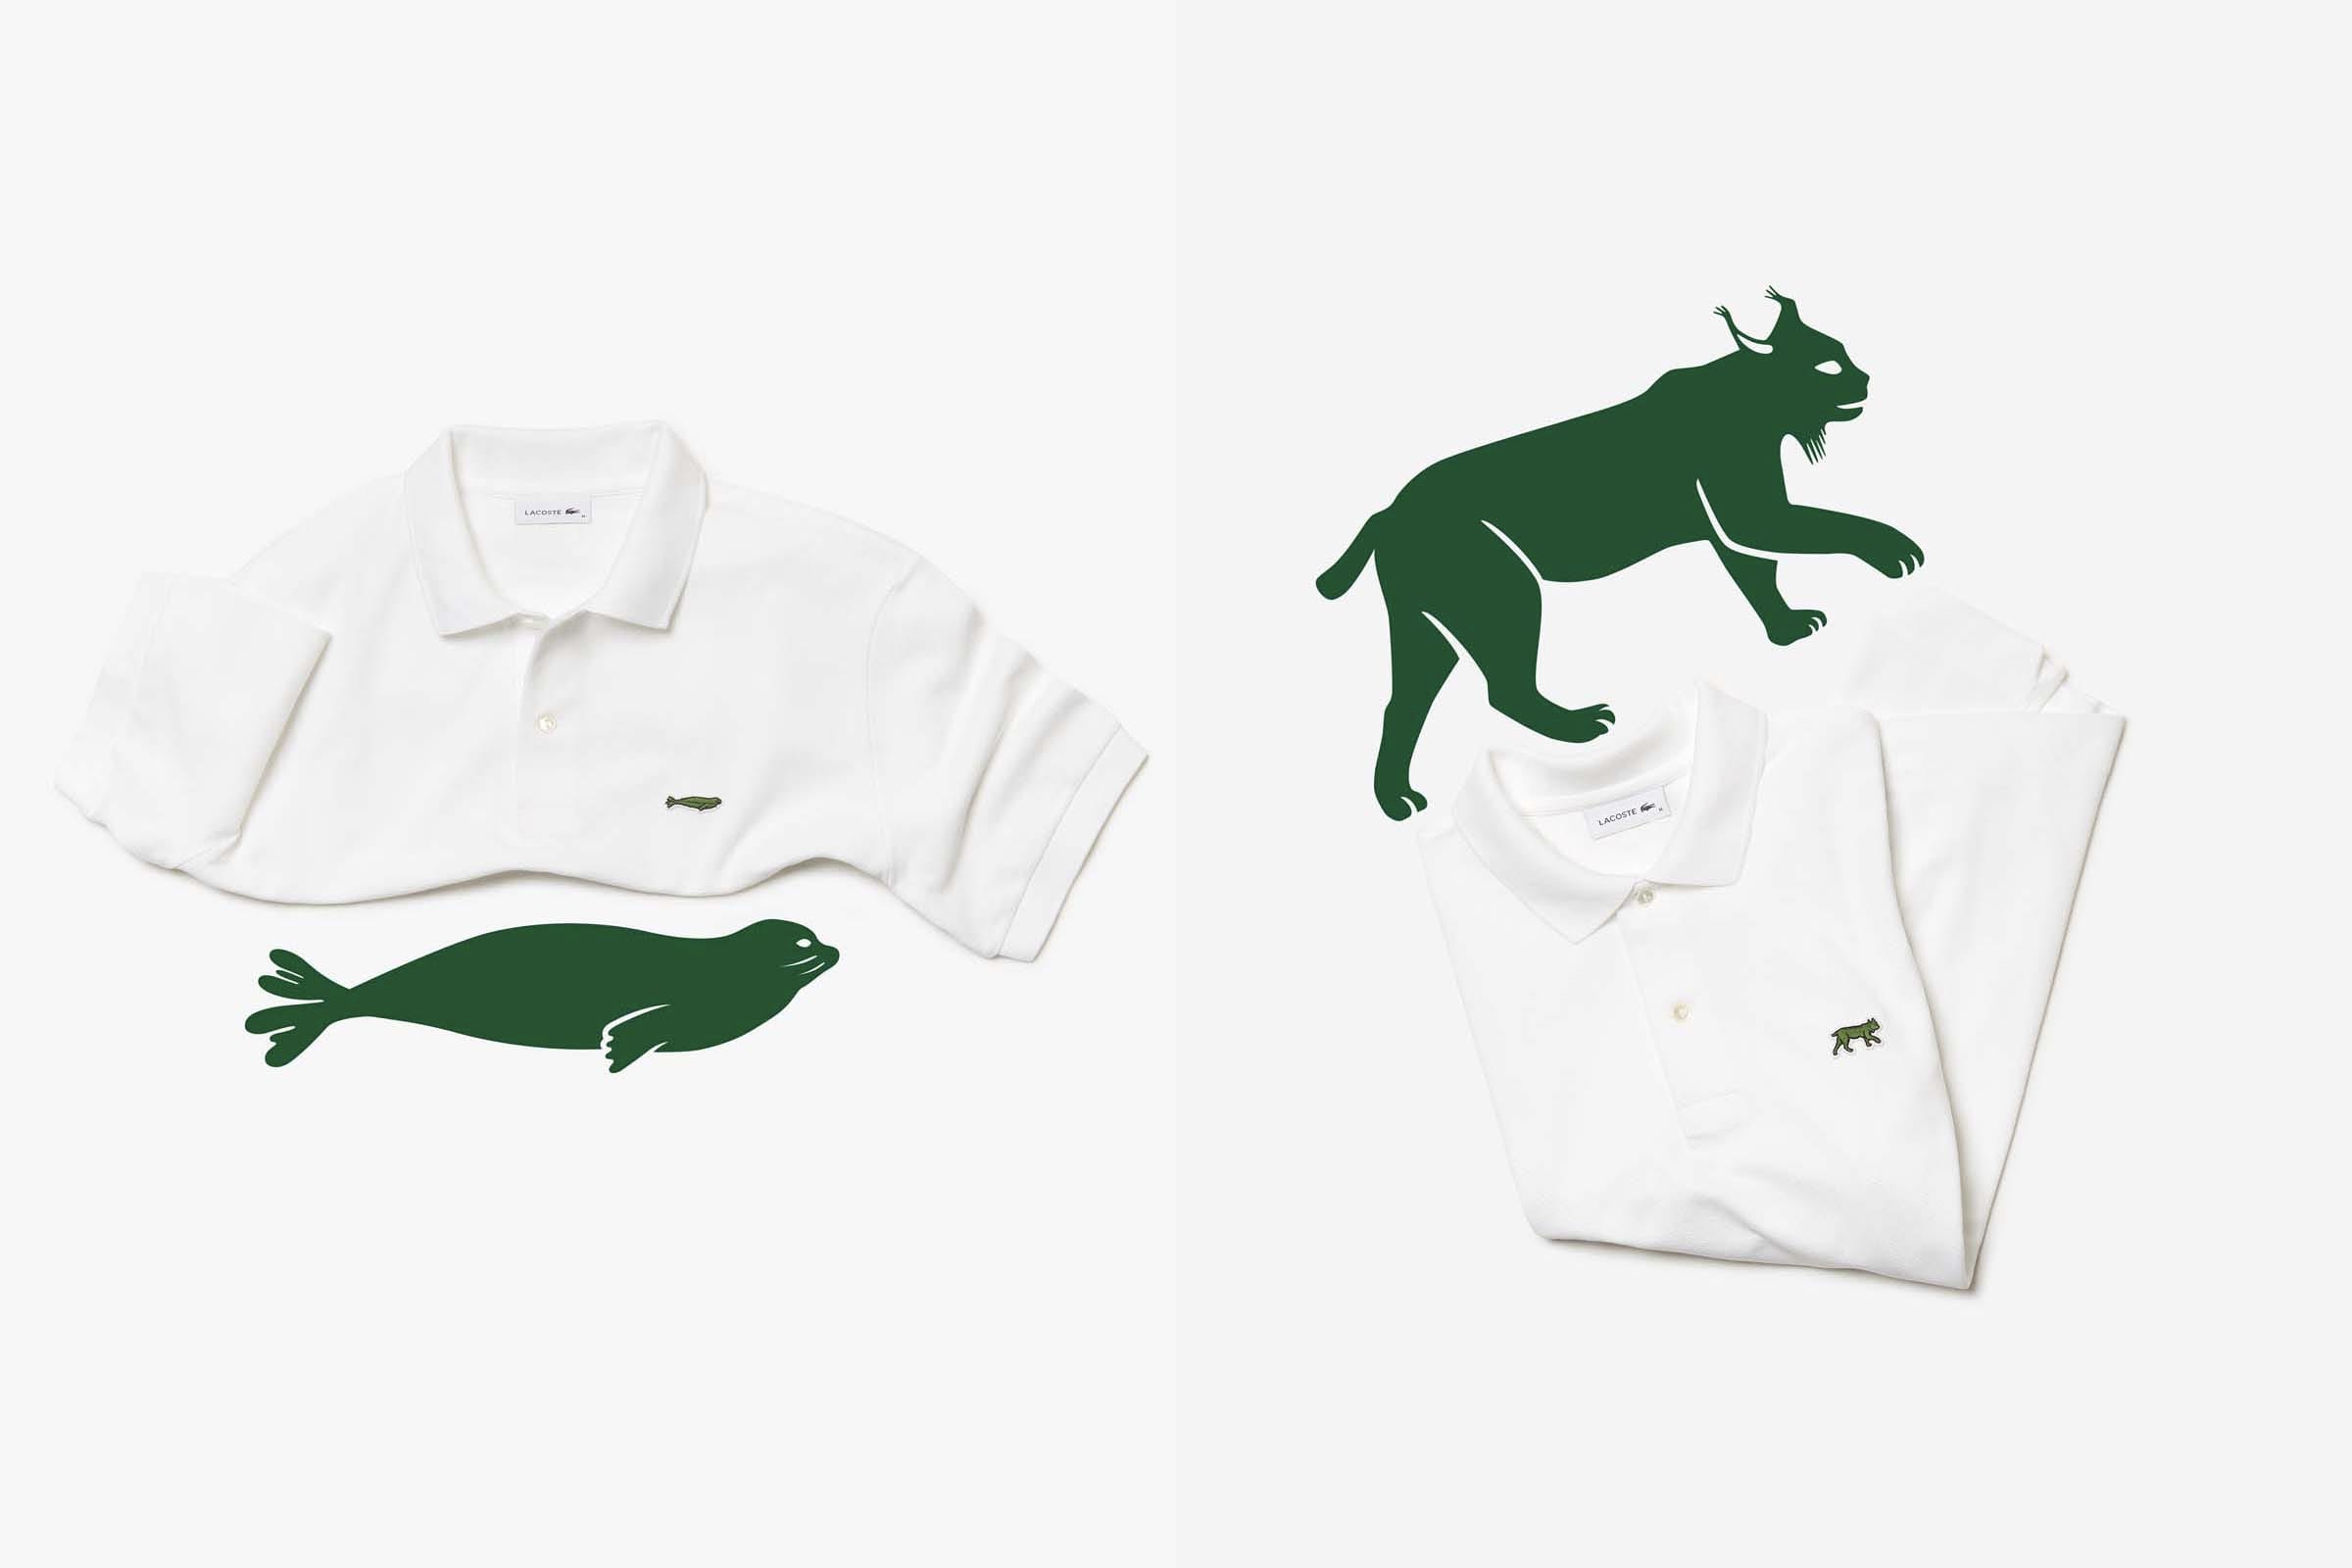 lacoste save our species polo for sale